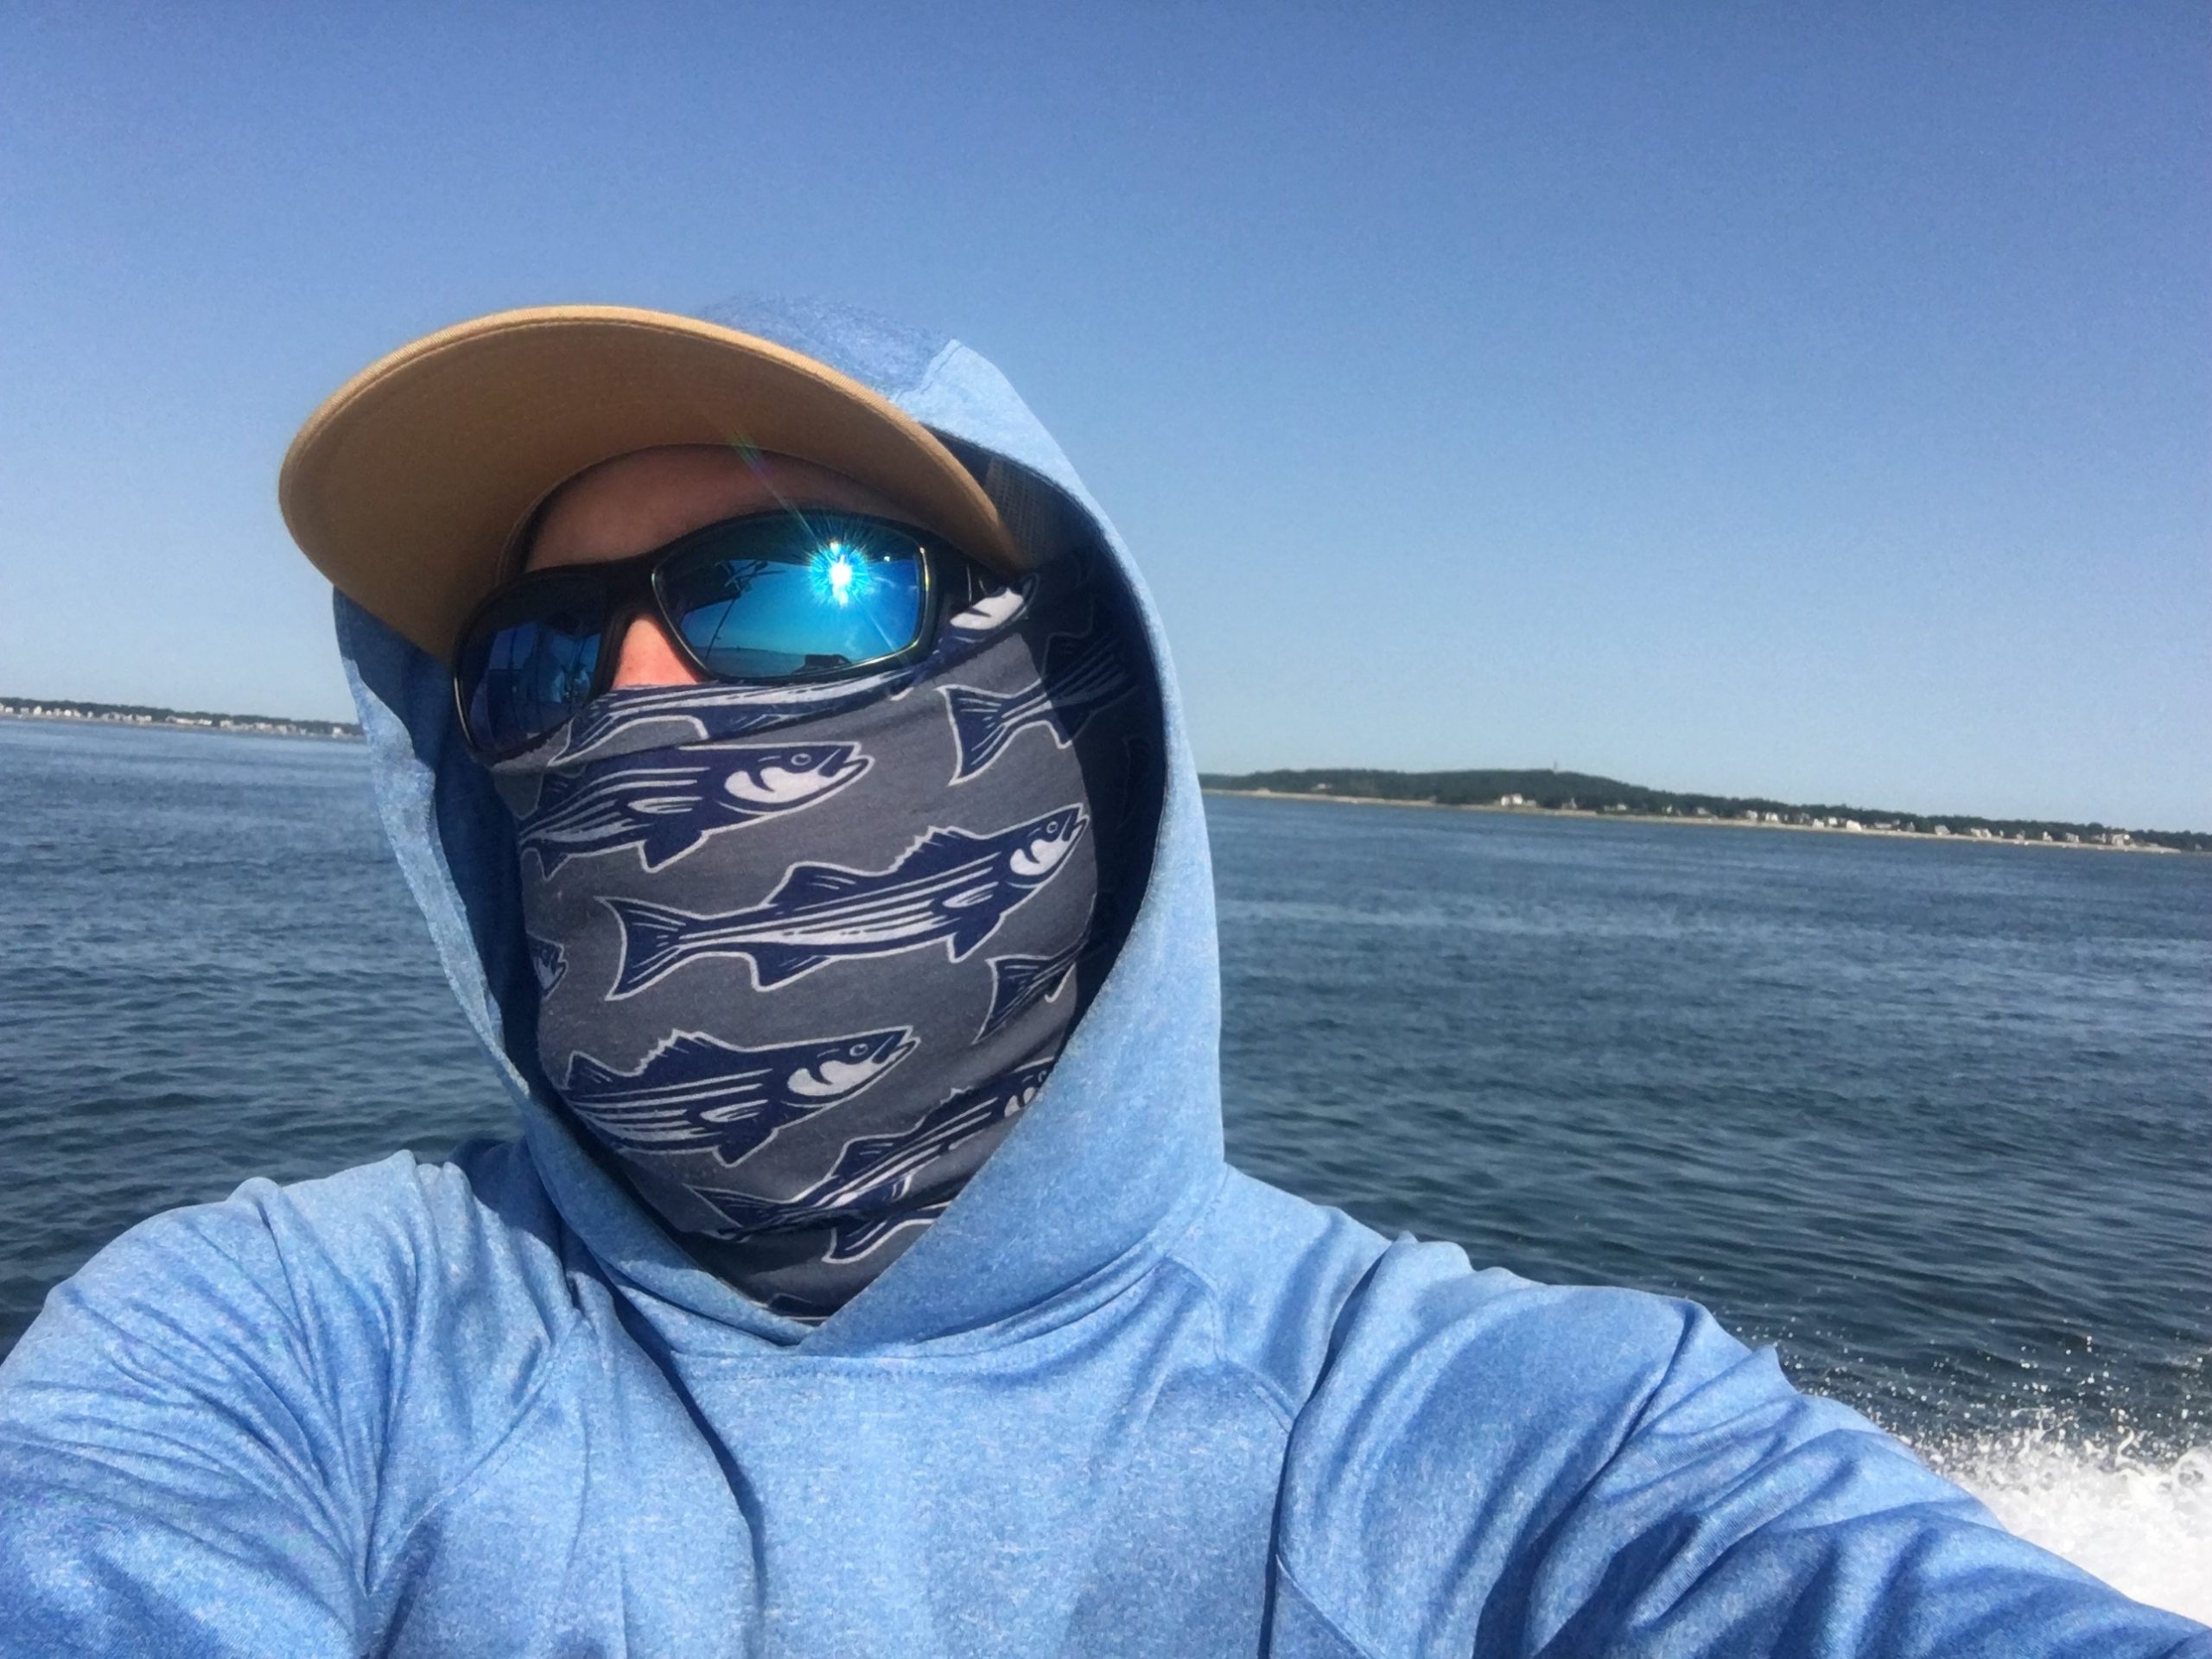 https://www.onthewater.com/wp-content/uploads/2020/04/Buff-Style-DIY-Face-Mask-scaled.jpg